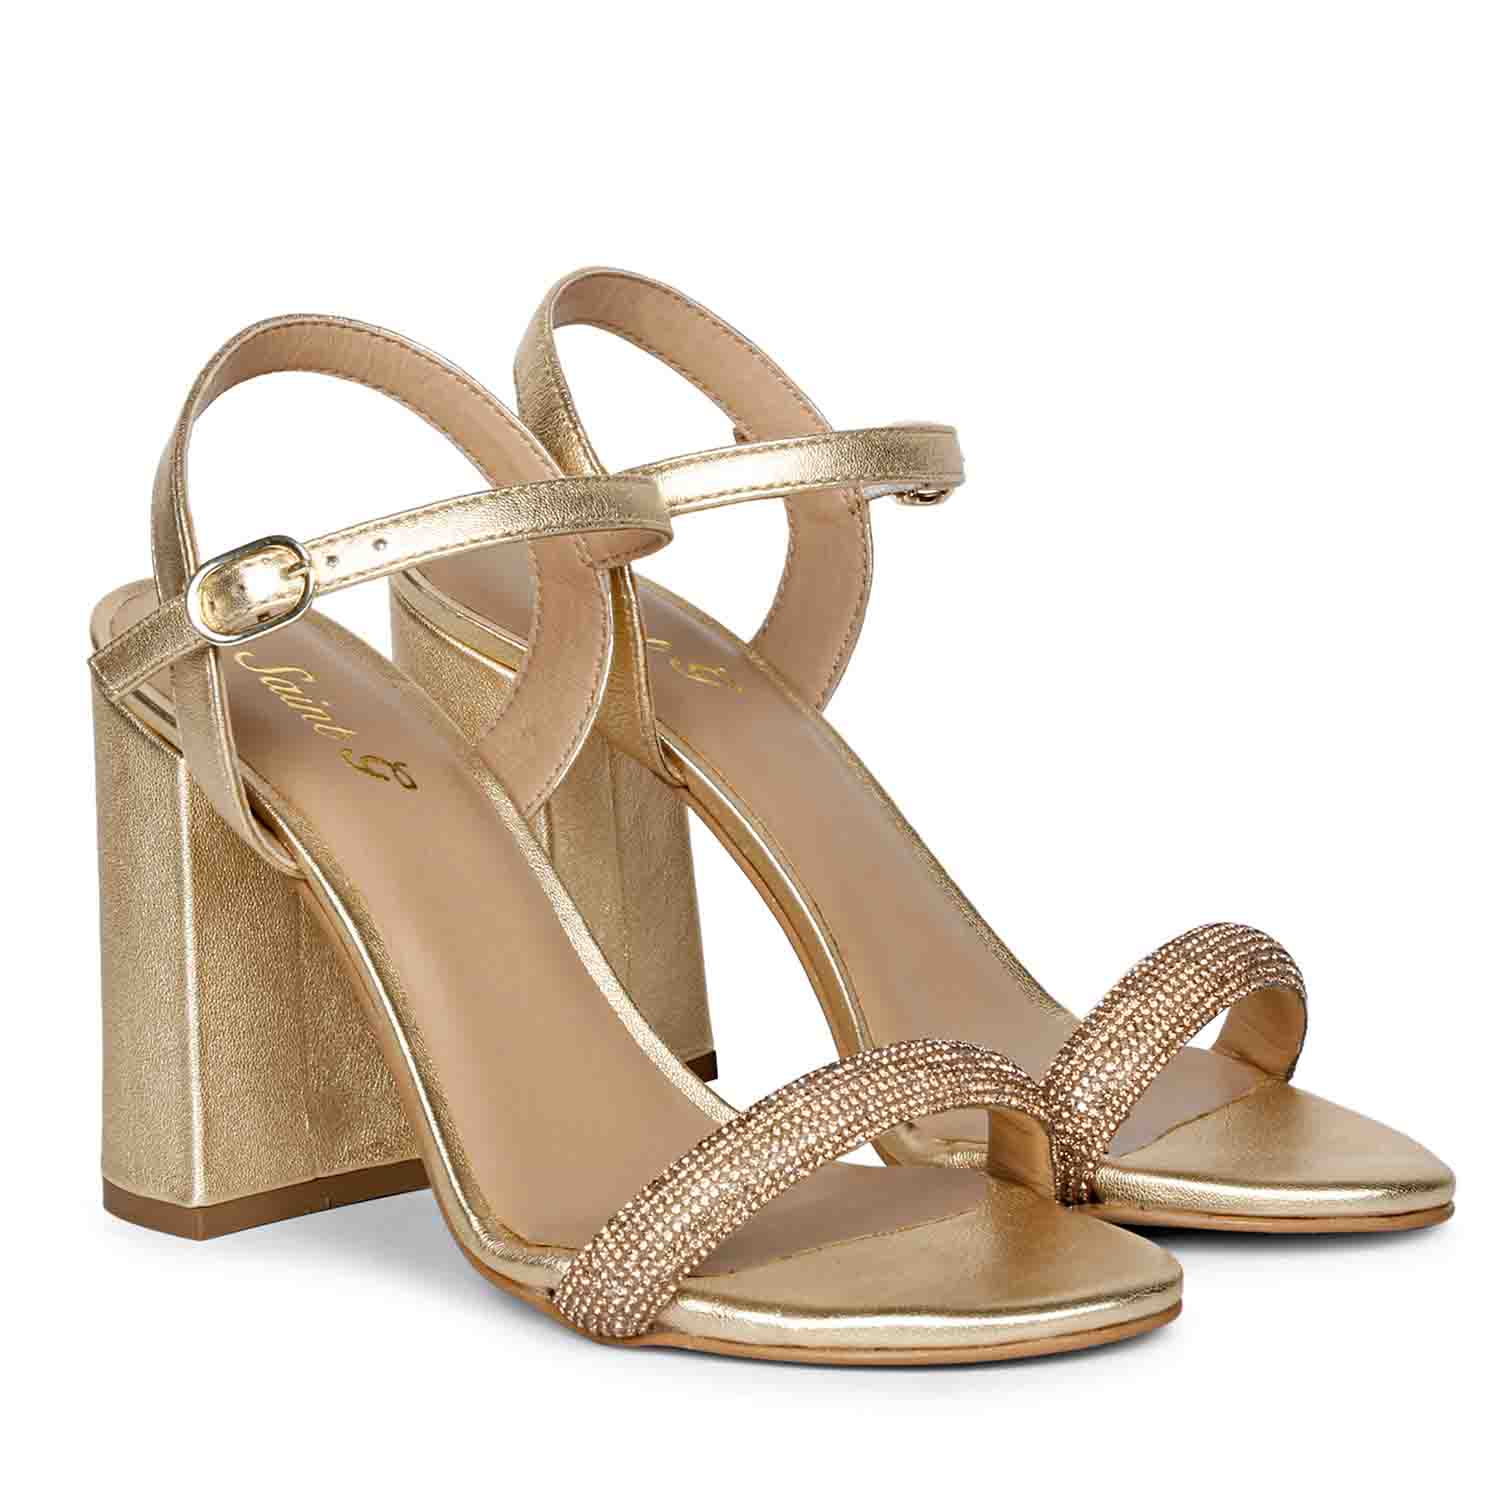 Buy SCHUTZ Women's Altina Ankle Strap Heeled Sandal, Gold, 7 at Amazon.in